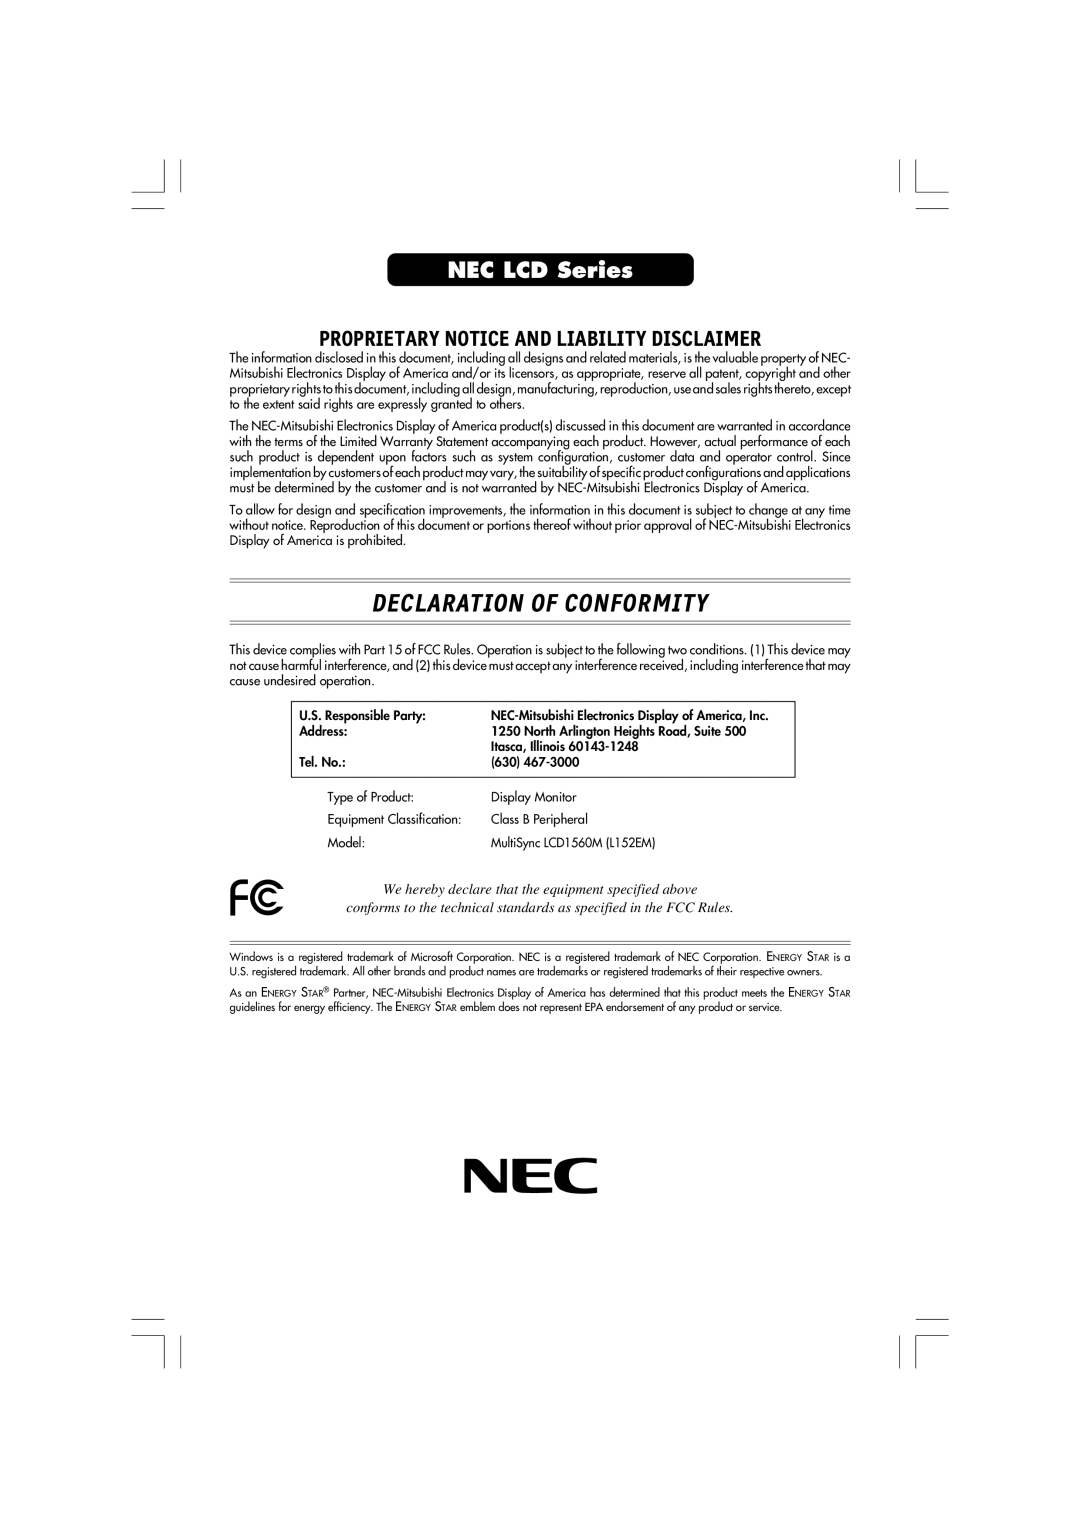 Mitsubishi Electronics LCD1560M Declaration Of Conformity, NEC LCD Series, Proprietary Notice And Liability Disclaimer 